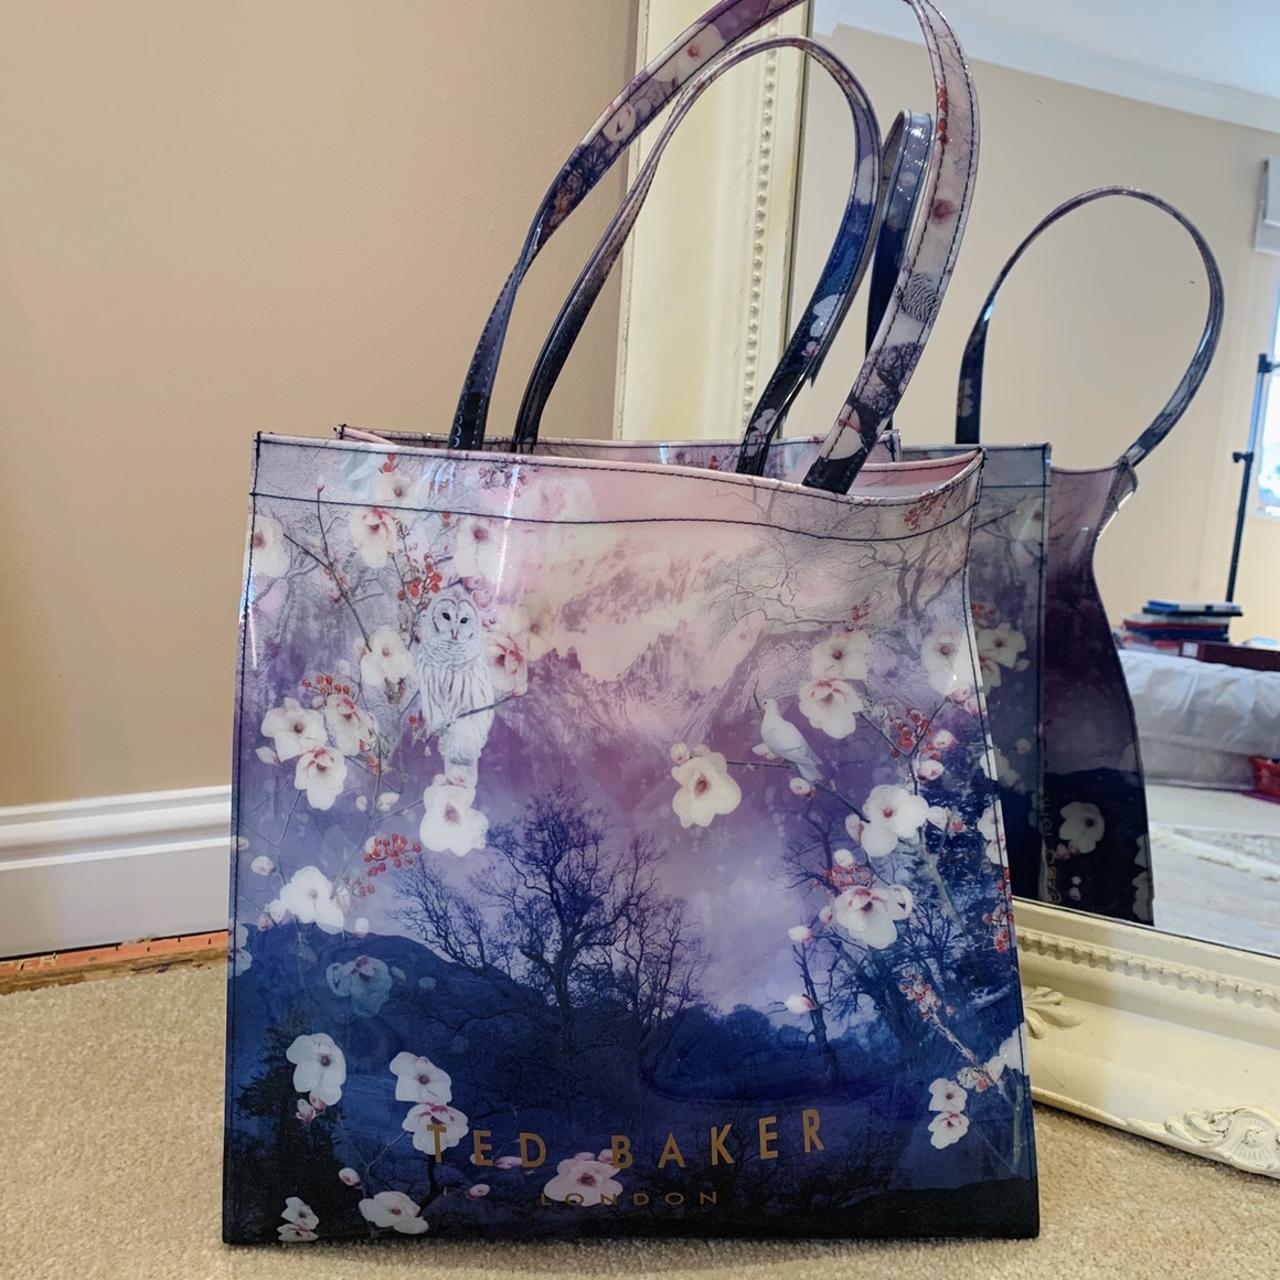 Handbag of the Month - March 16: Ted Baker Ethereal Posie Travel Bag -  Laura Summers